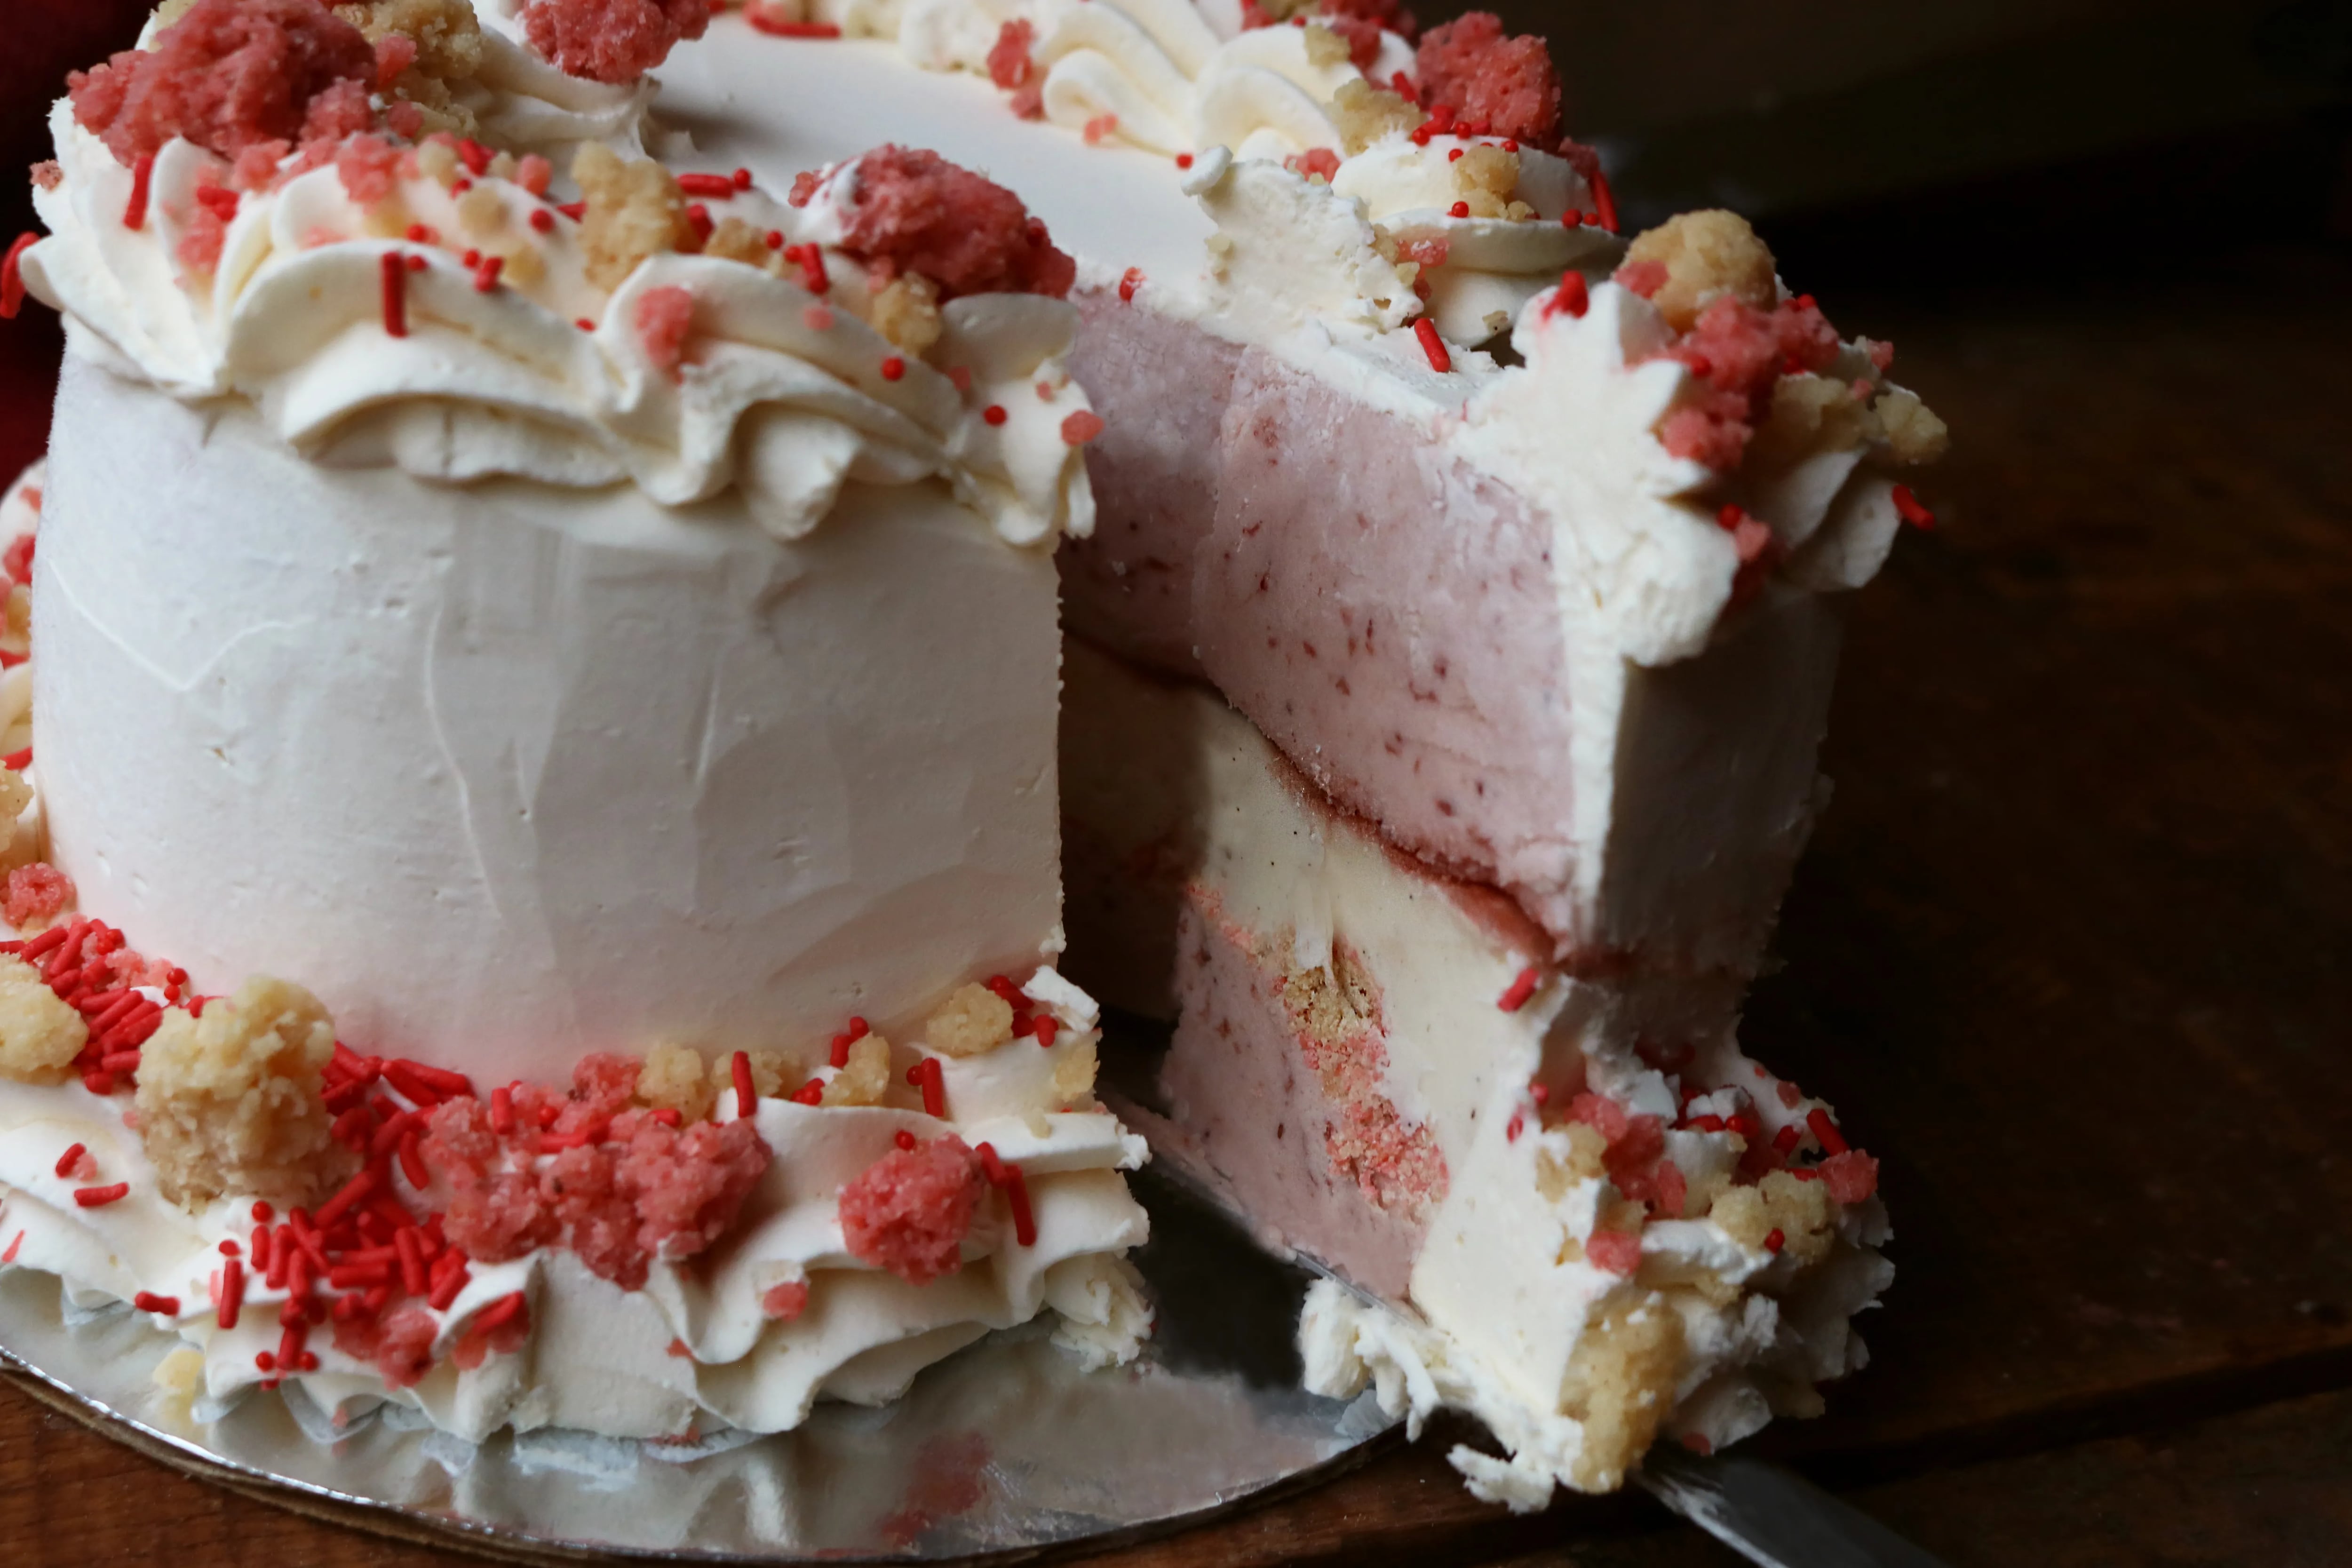 The strawberry shortcake ice cream cake at the Franklin Fountain is gluten-free.